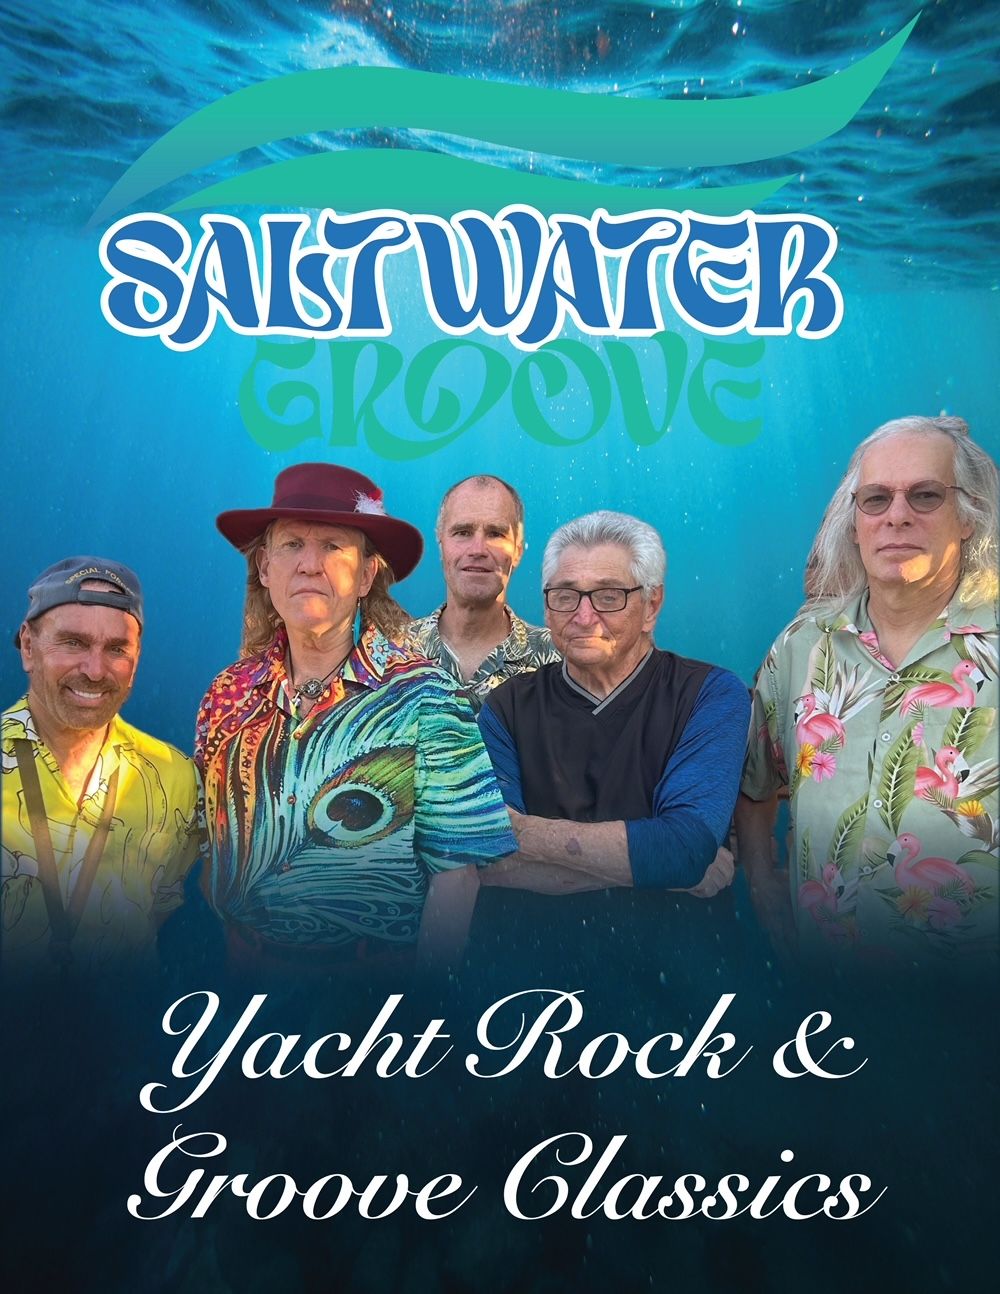 Friday.. Beaches Welcomes Daytona Yacht Rock Band, Saltwater Groove! FREE Show